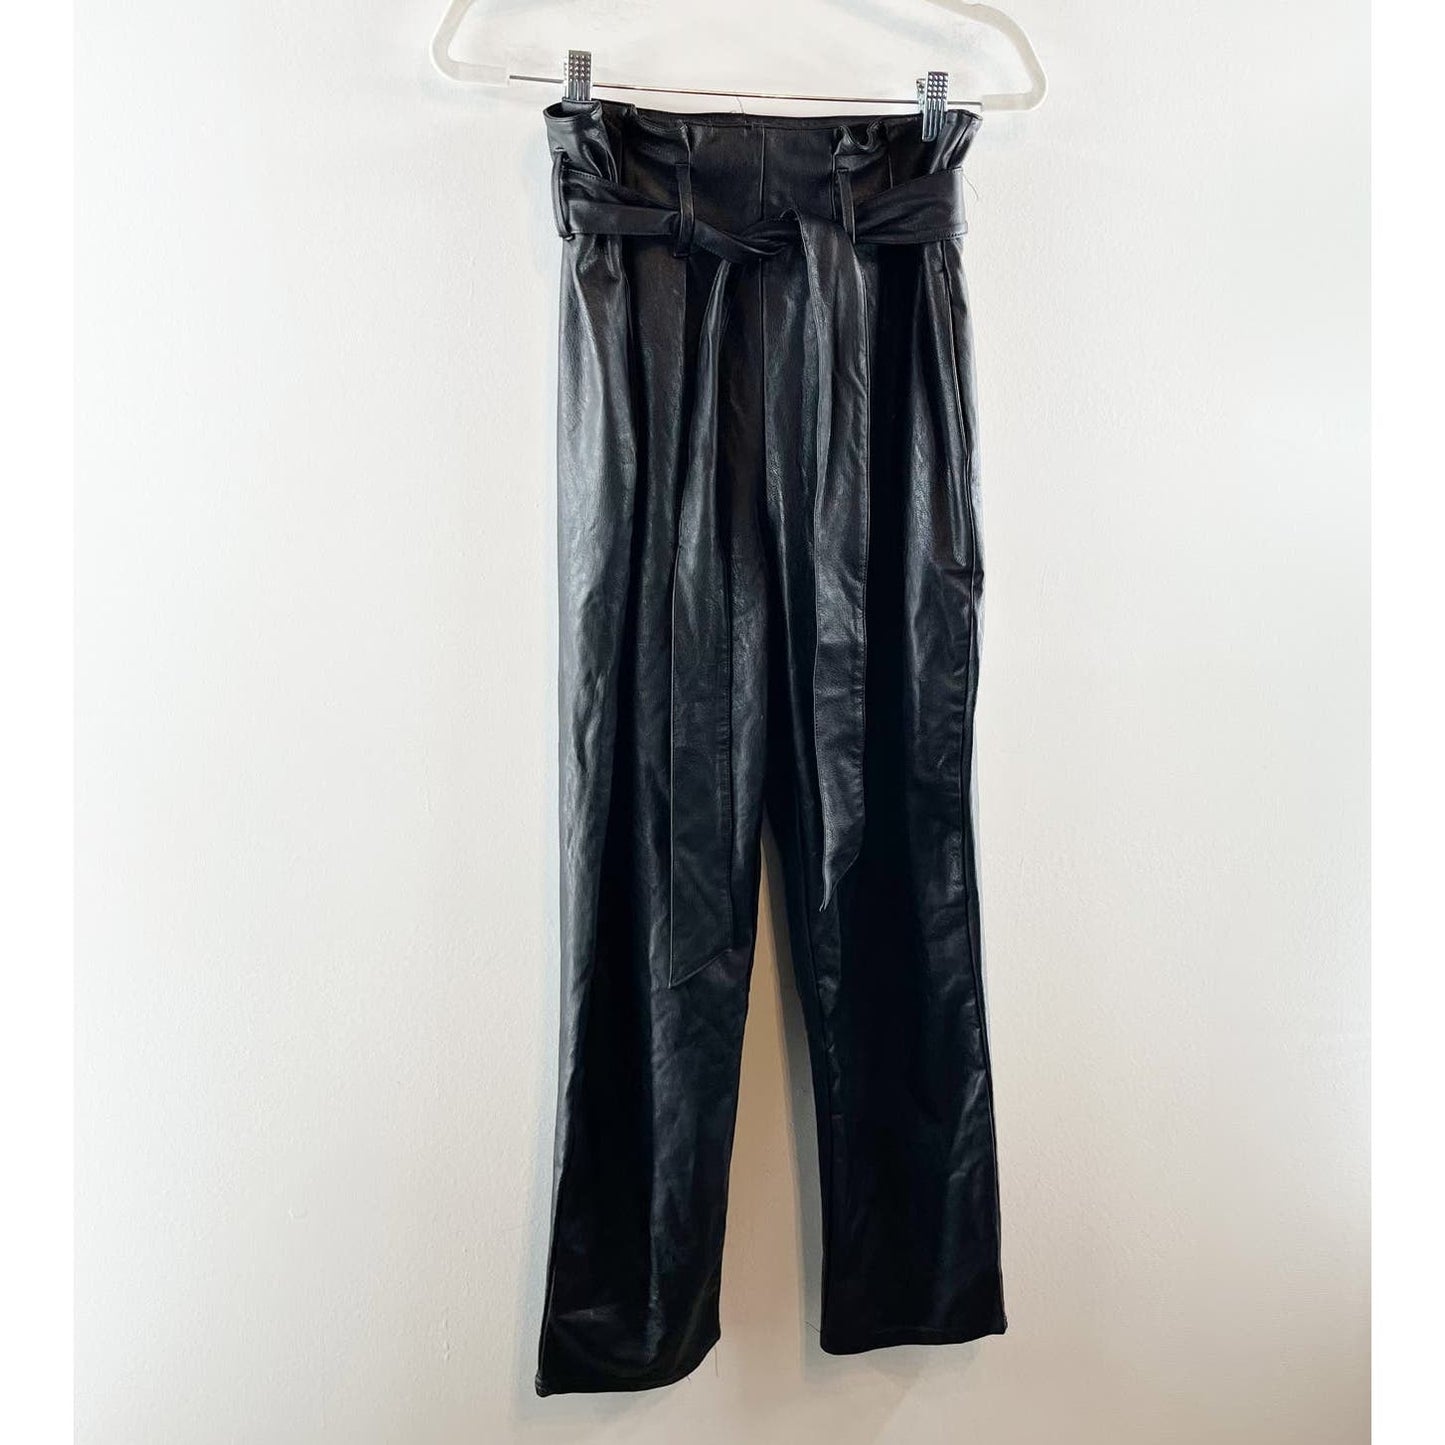 Commando Belted Paperbag Waist Cropped Faux Leather Pants Black Medium